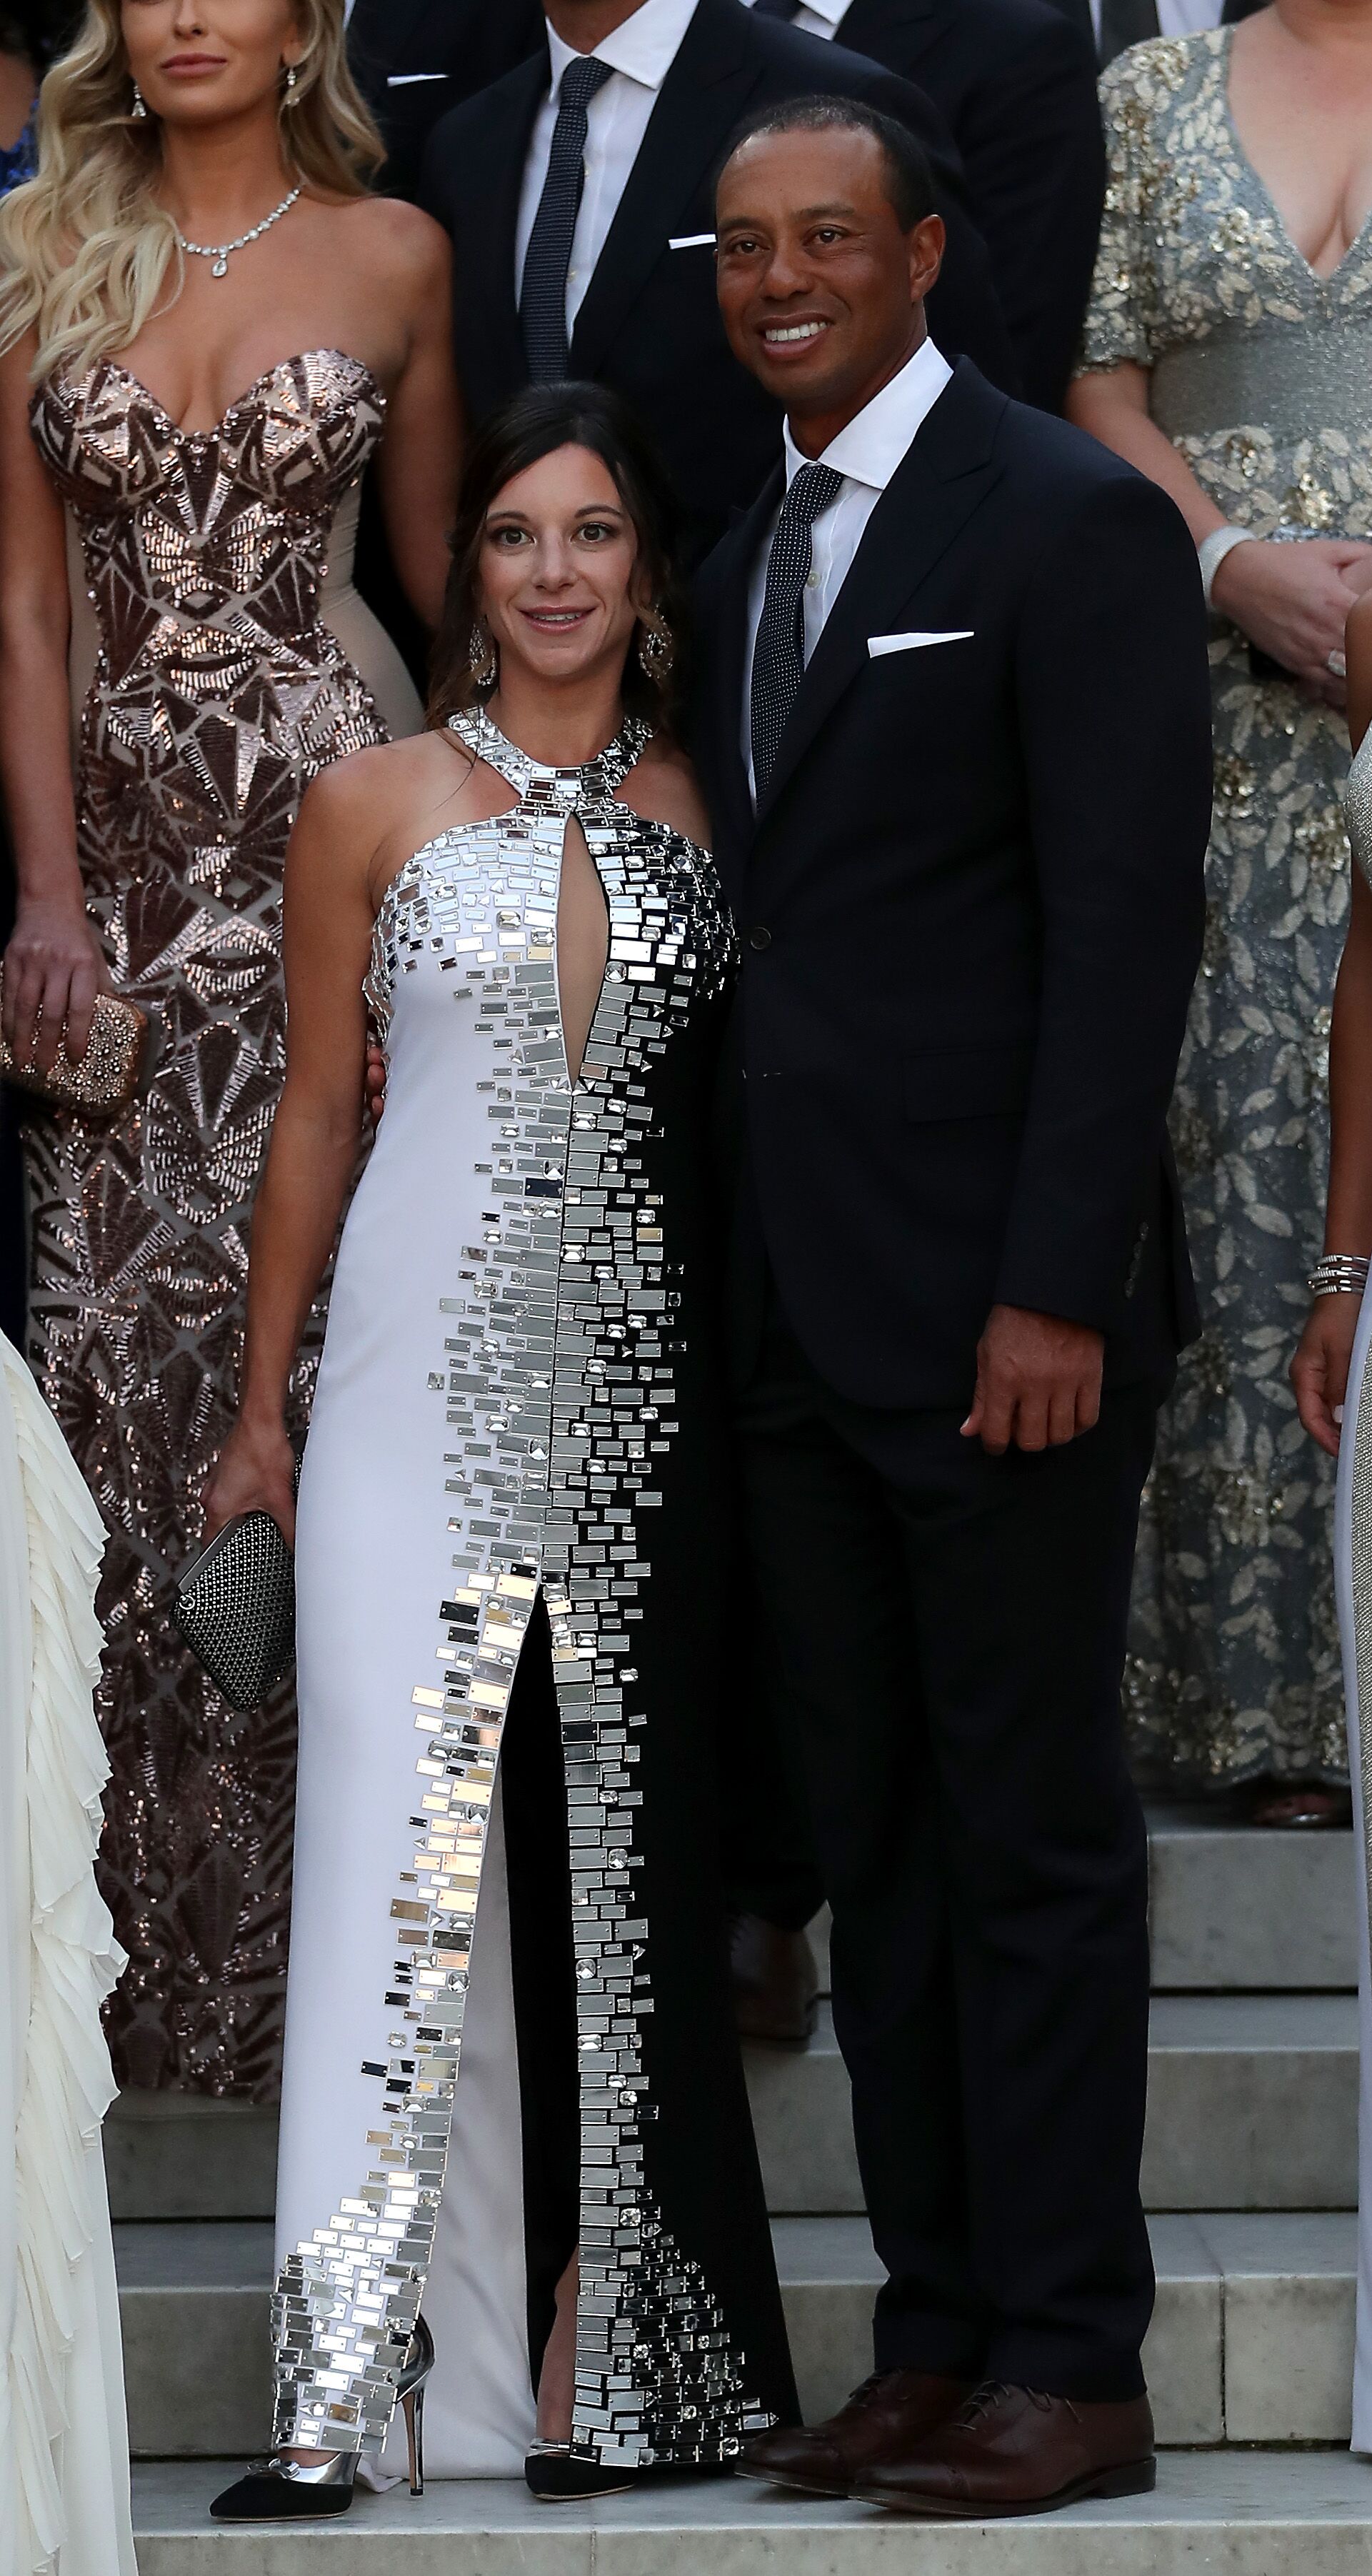  Tiger Woods poses with girlfriend Erica Herman before the Ryder Cup gala dinner. | Source: Getty Images